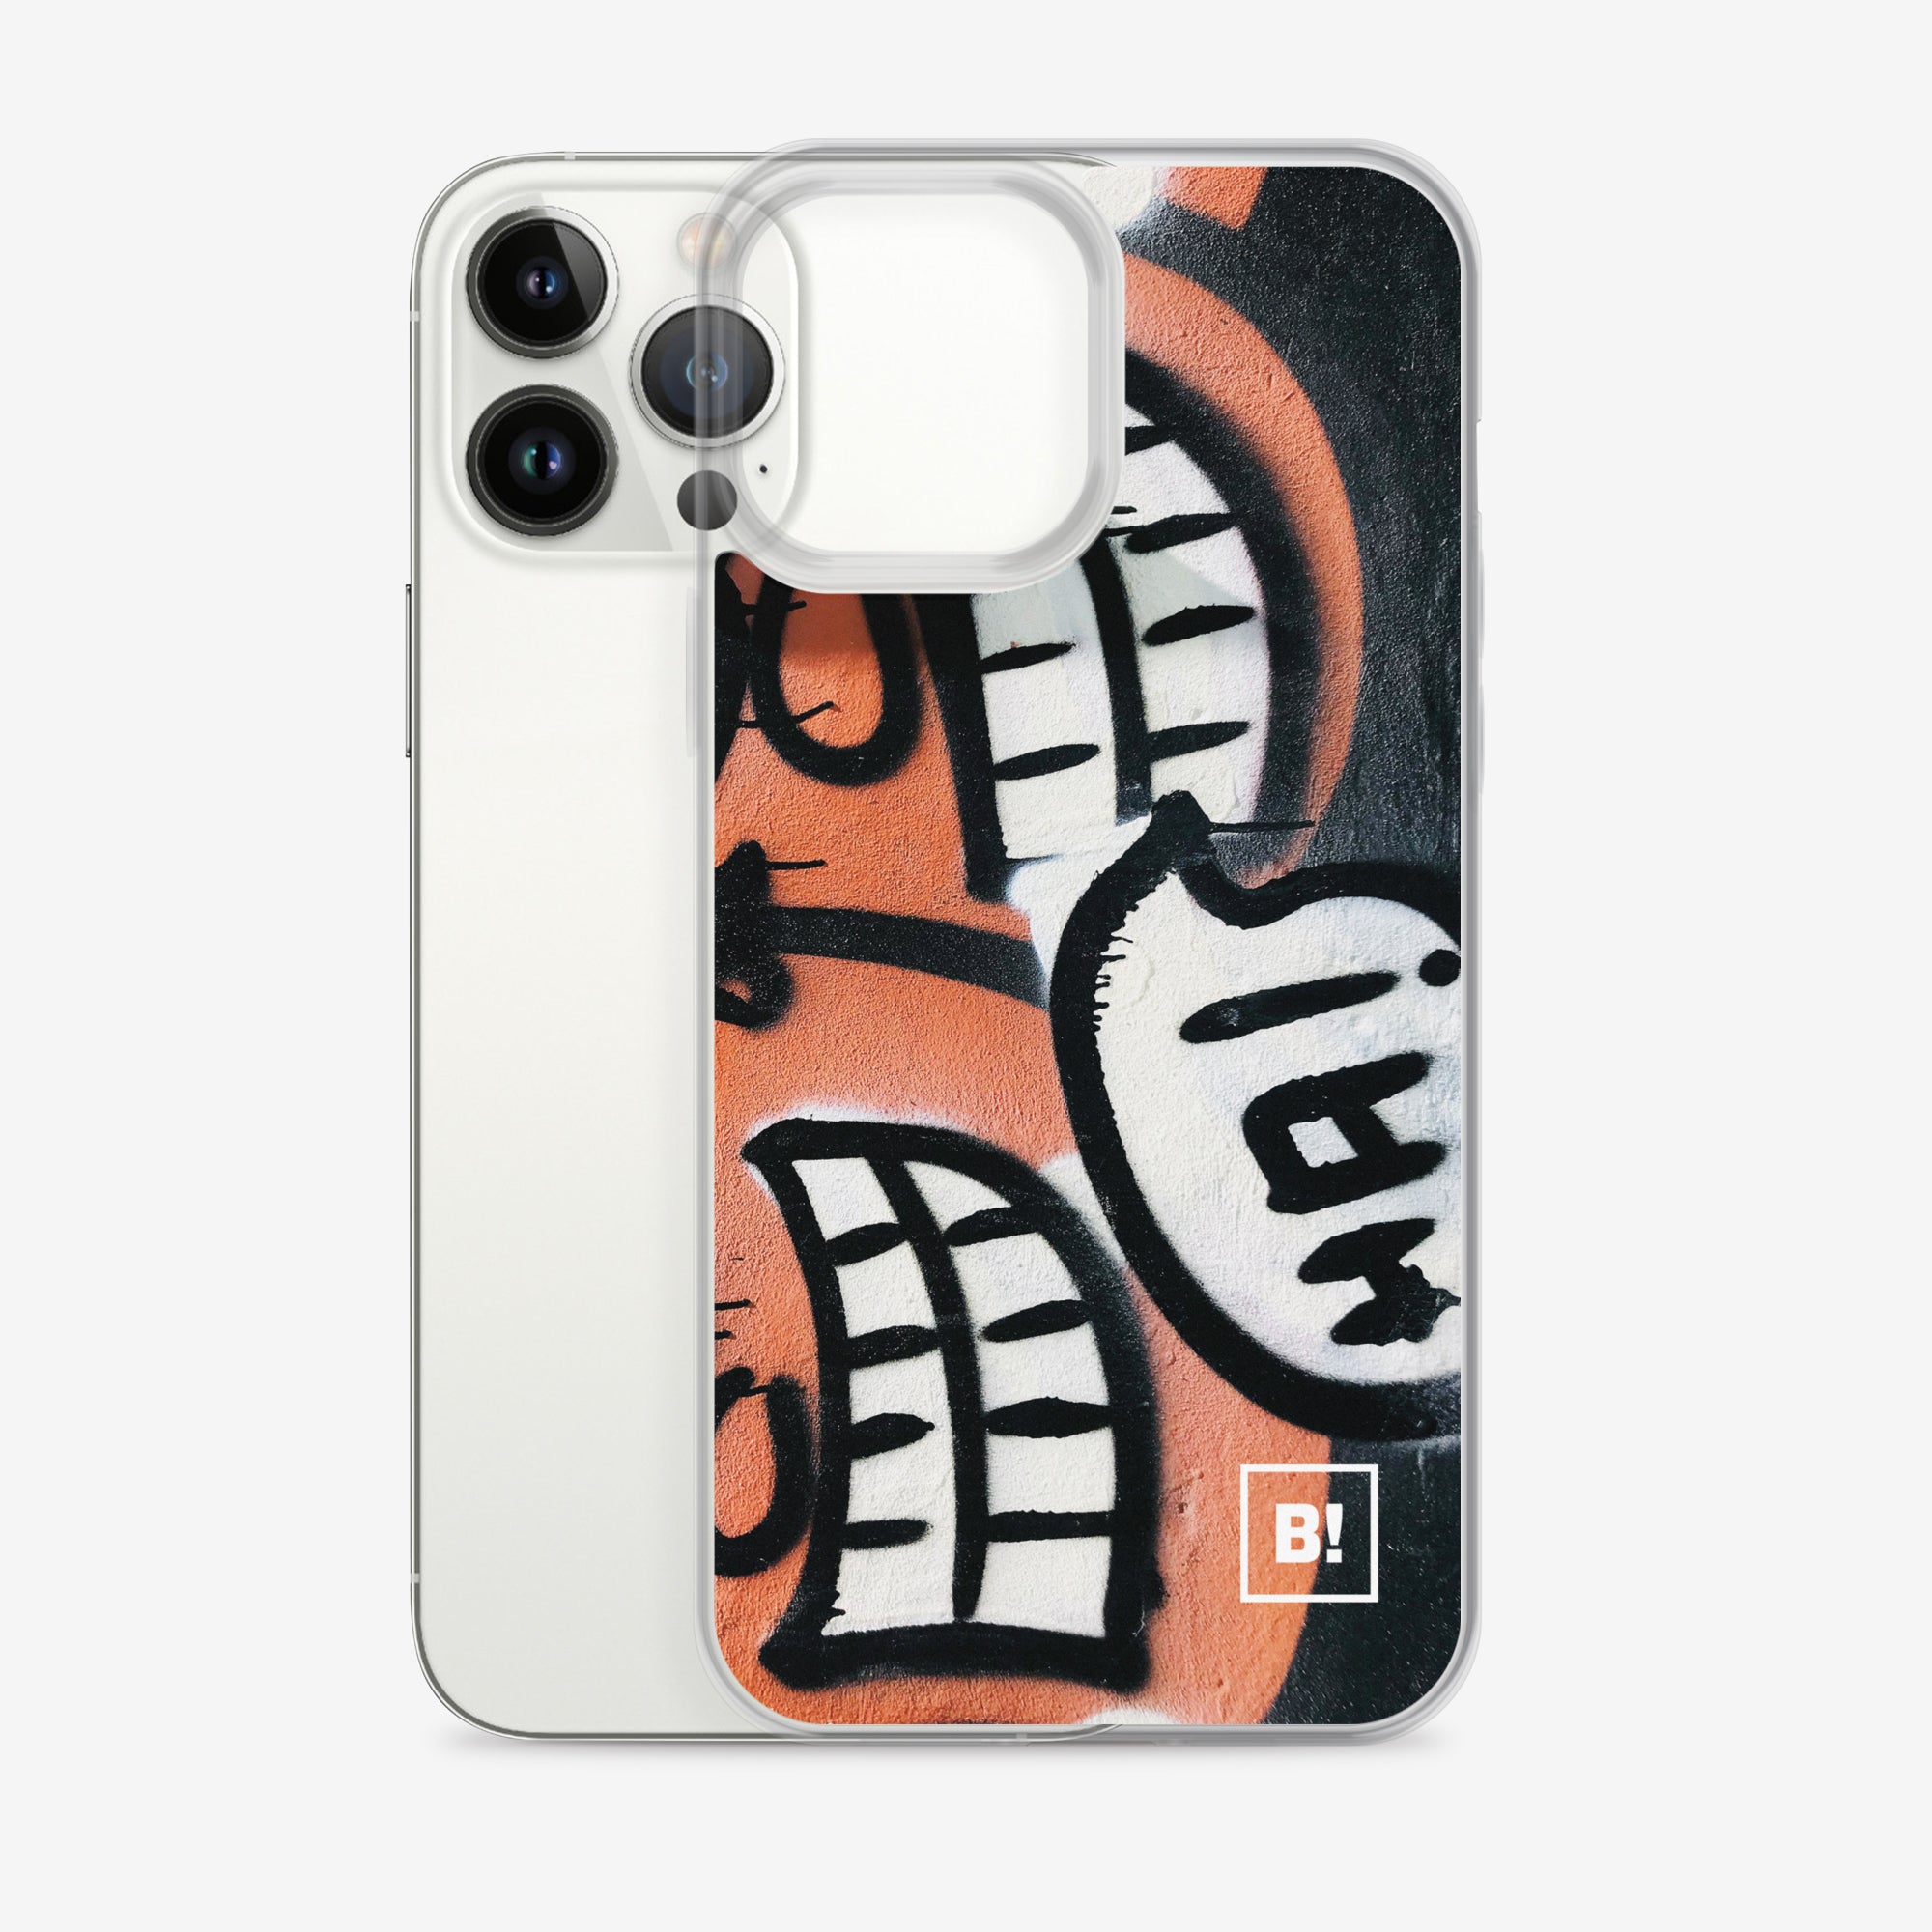 Binspired HA! of Dreams Urban Art iPhone 13 Pro Max Clear Case with Phone